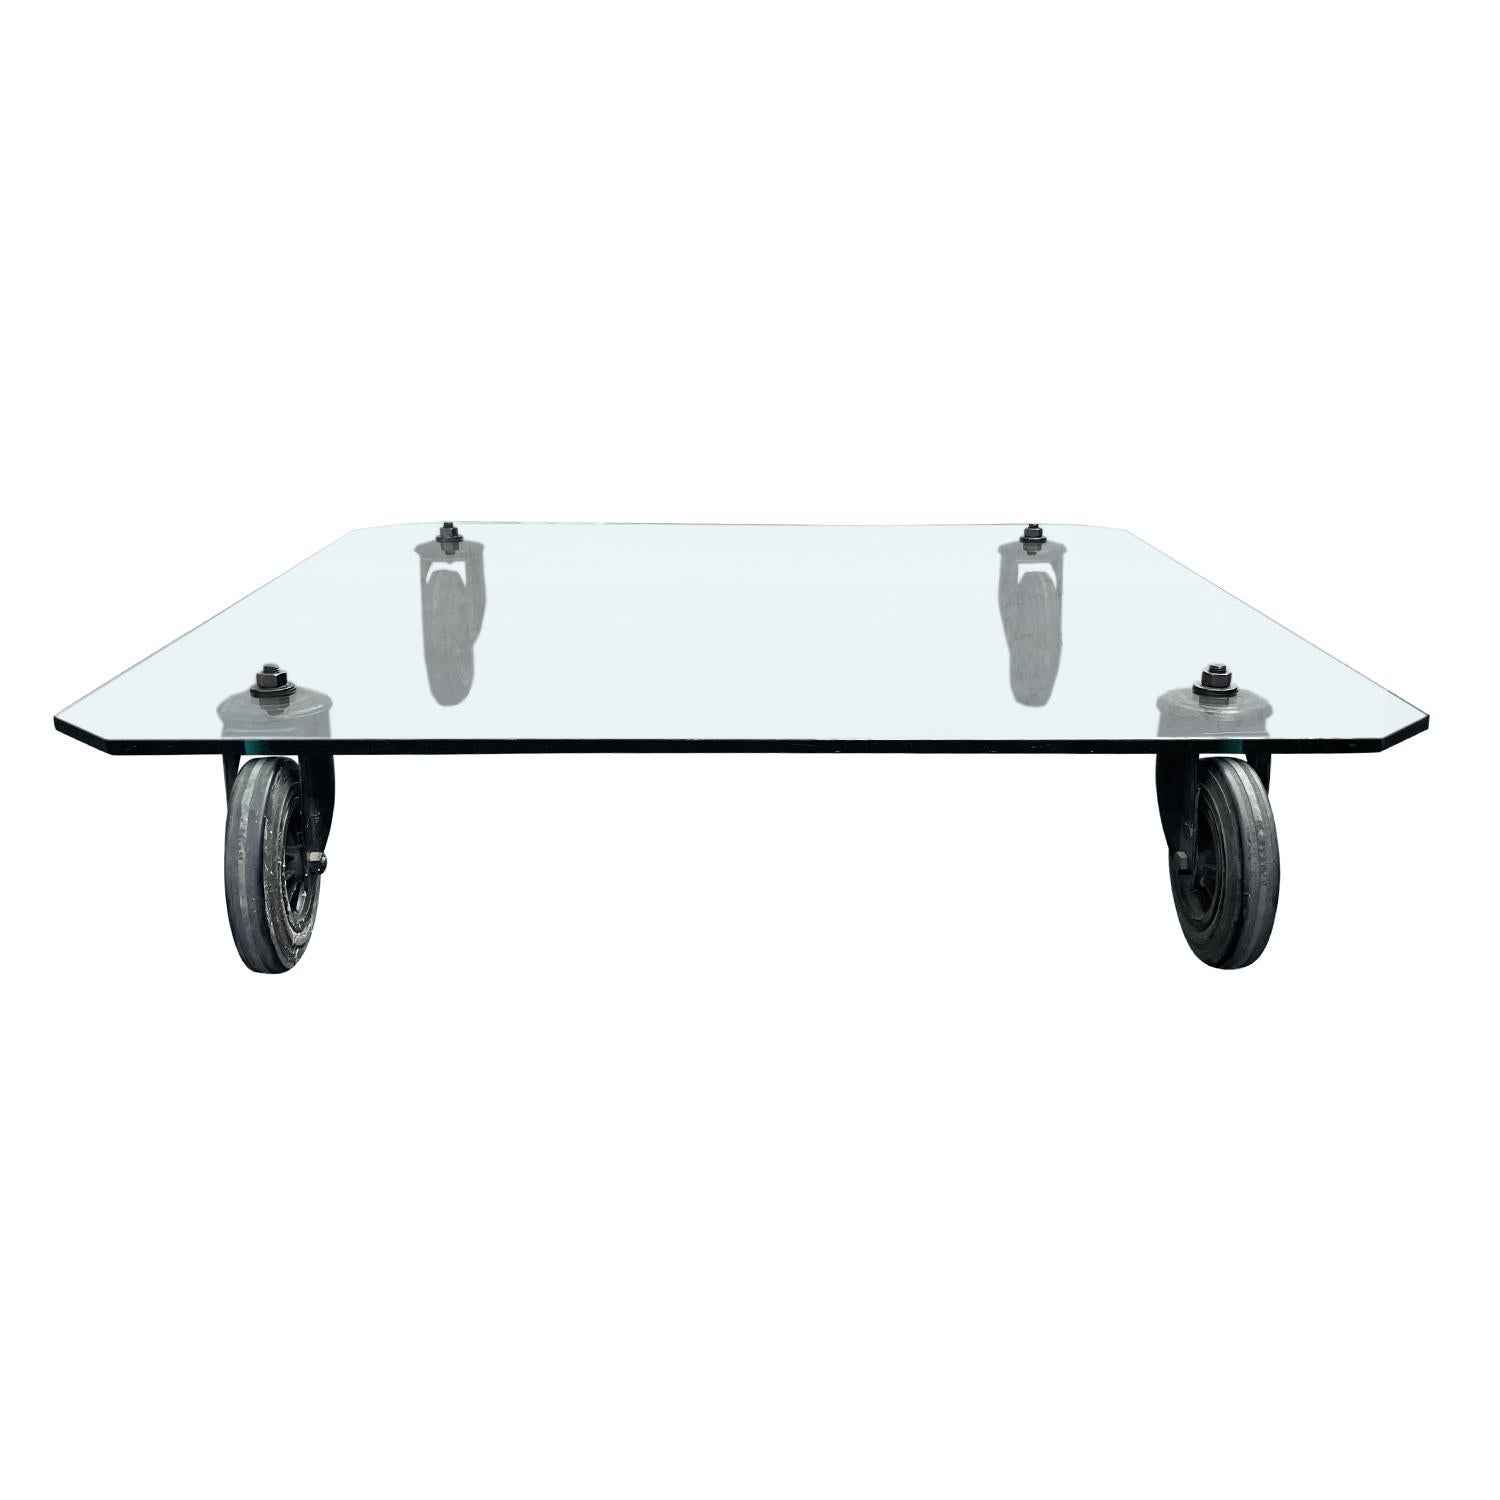 A vintage Mid-Century Modern coffee table ( tavolo con route ) from Gae Aulenti, the original for Fontana Arte, with glass top and swivel wheels in good condition. The Italian industrial trolley was used to transport glass in the Fontana Arte plant.